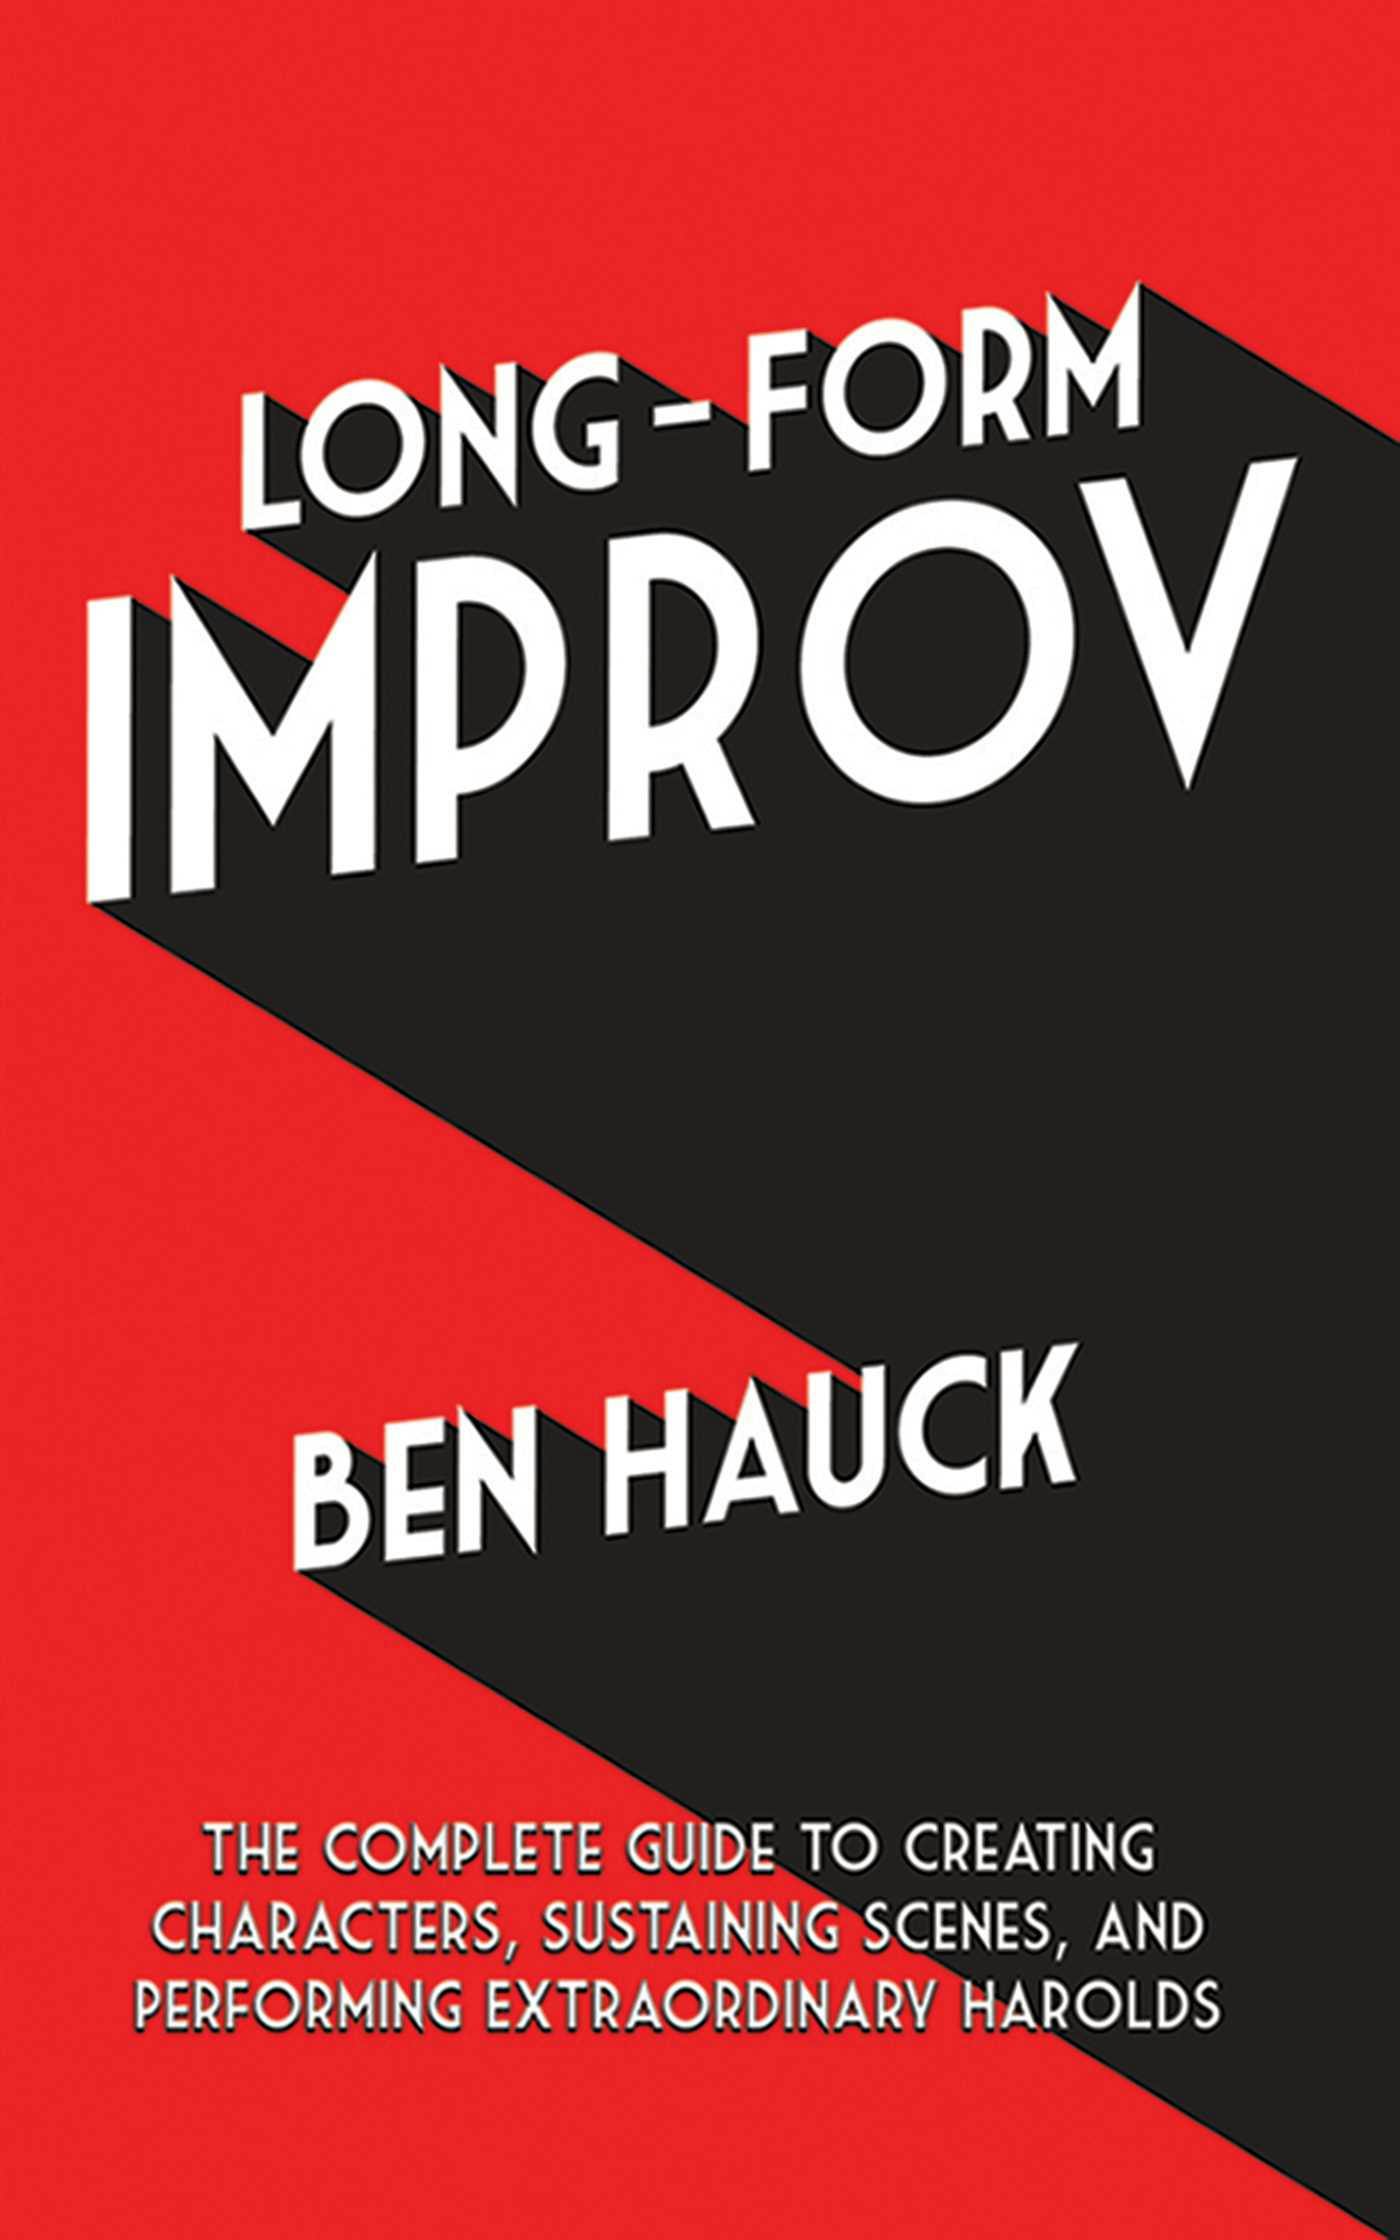 Long-Form Improv: The Complete Guide to Creating Characters, Sustaining Scenes, and Performing Extraordinary Harolds - Ben Hauck